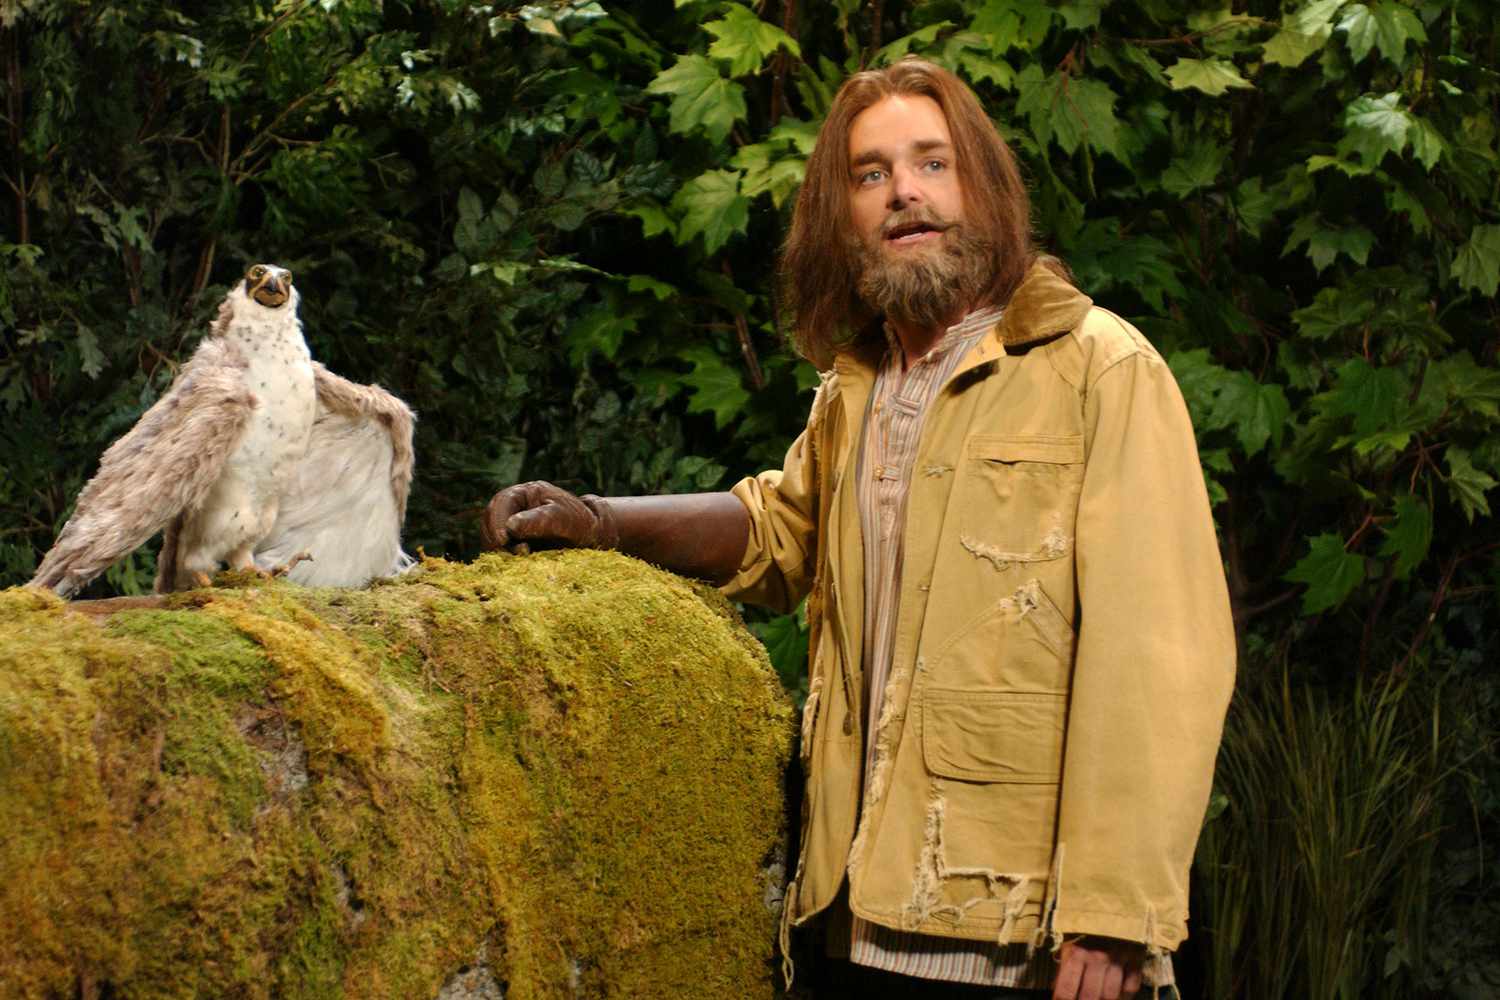 SATURDAY NIGHT LIVE Will Forte as The Falconer during "The Falconer" skit